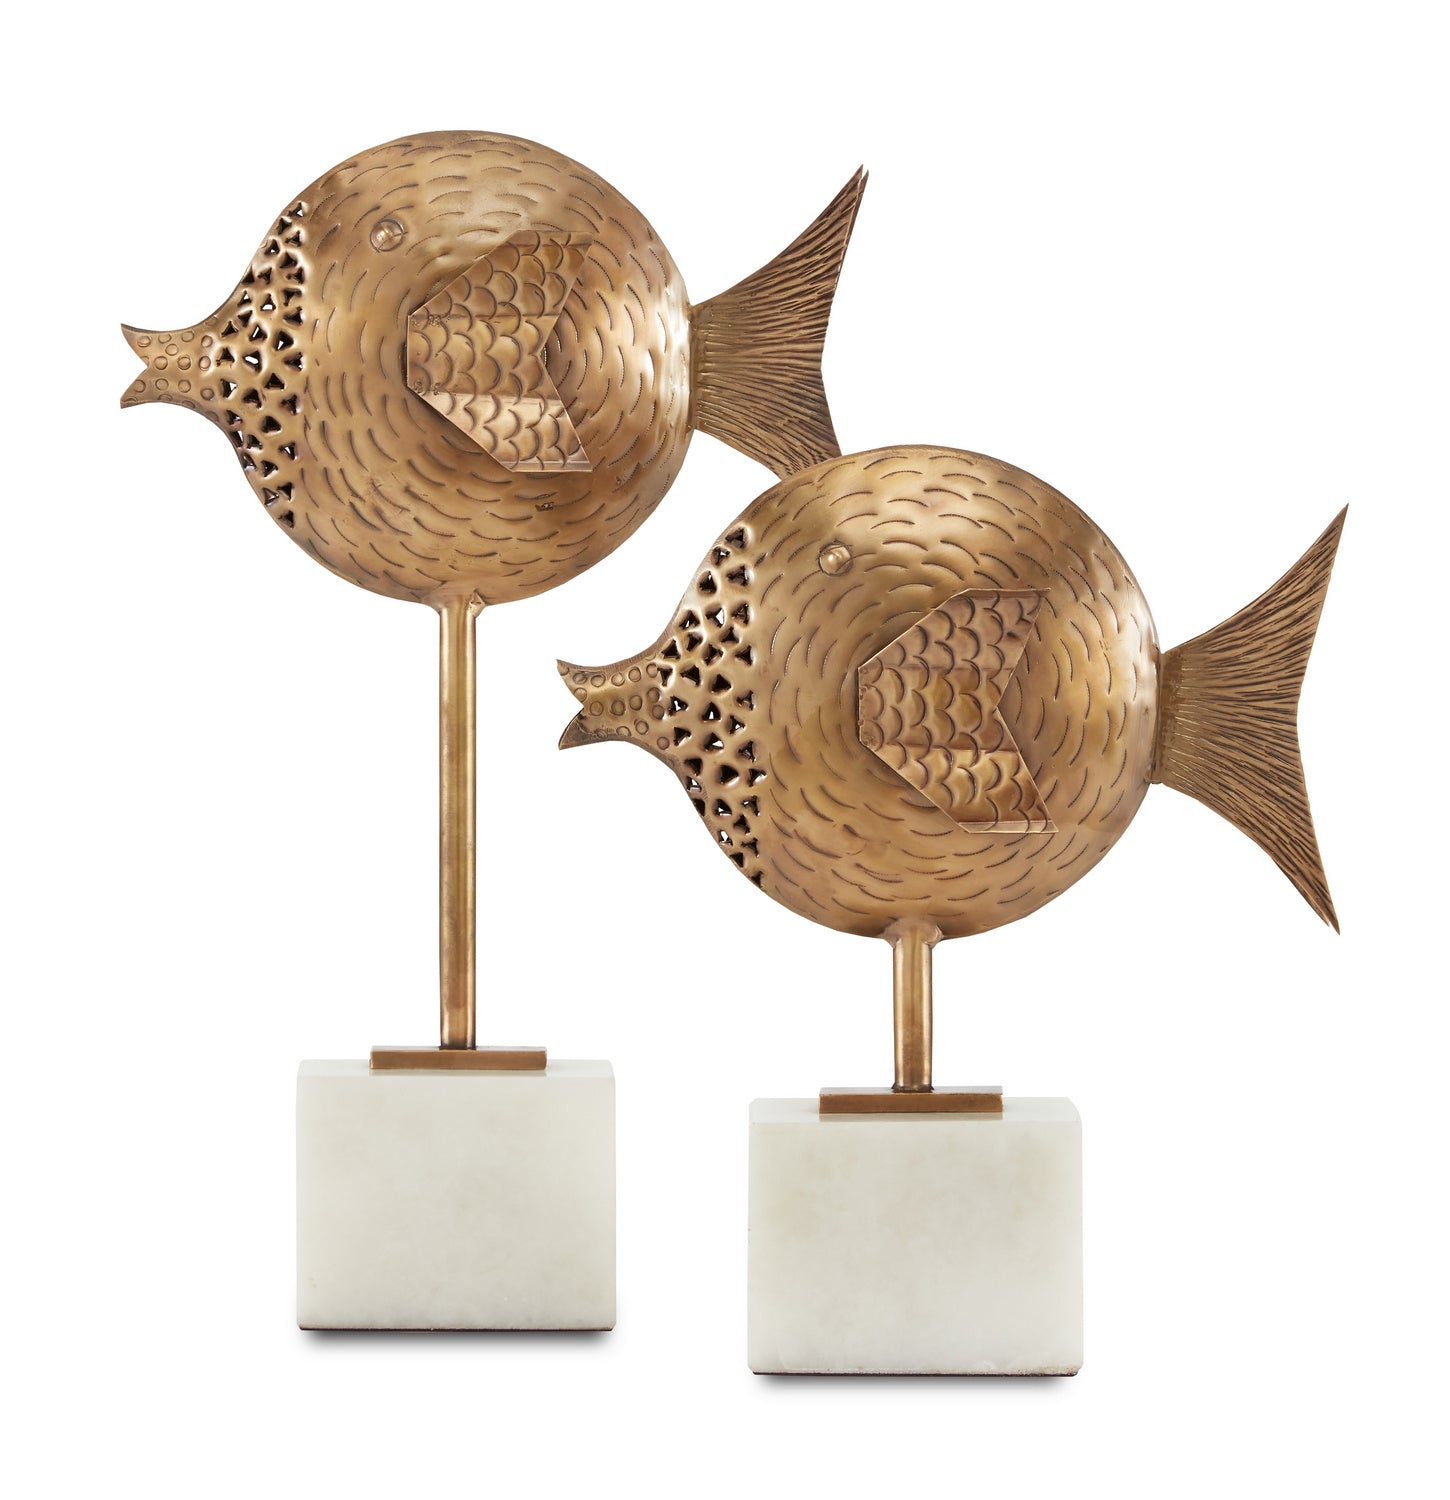 Fish Set of 2 from the Cici collection in Antique Brass/White finish